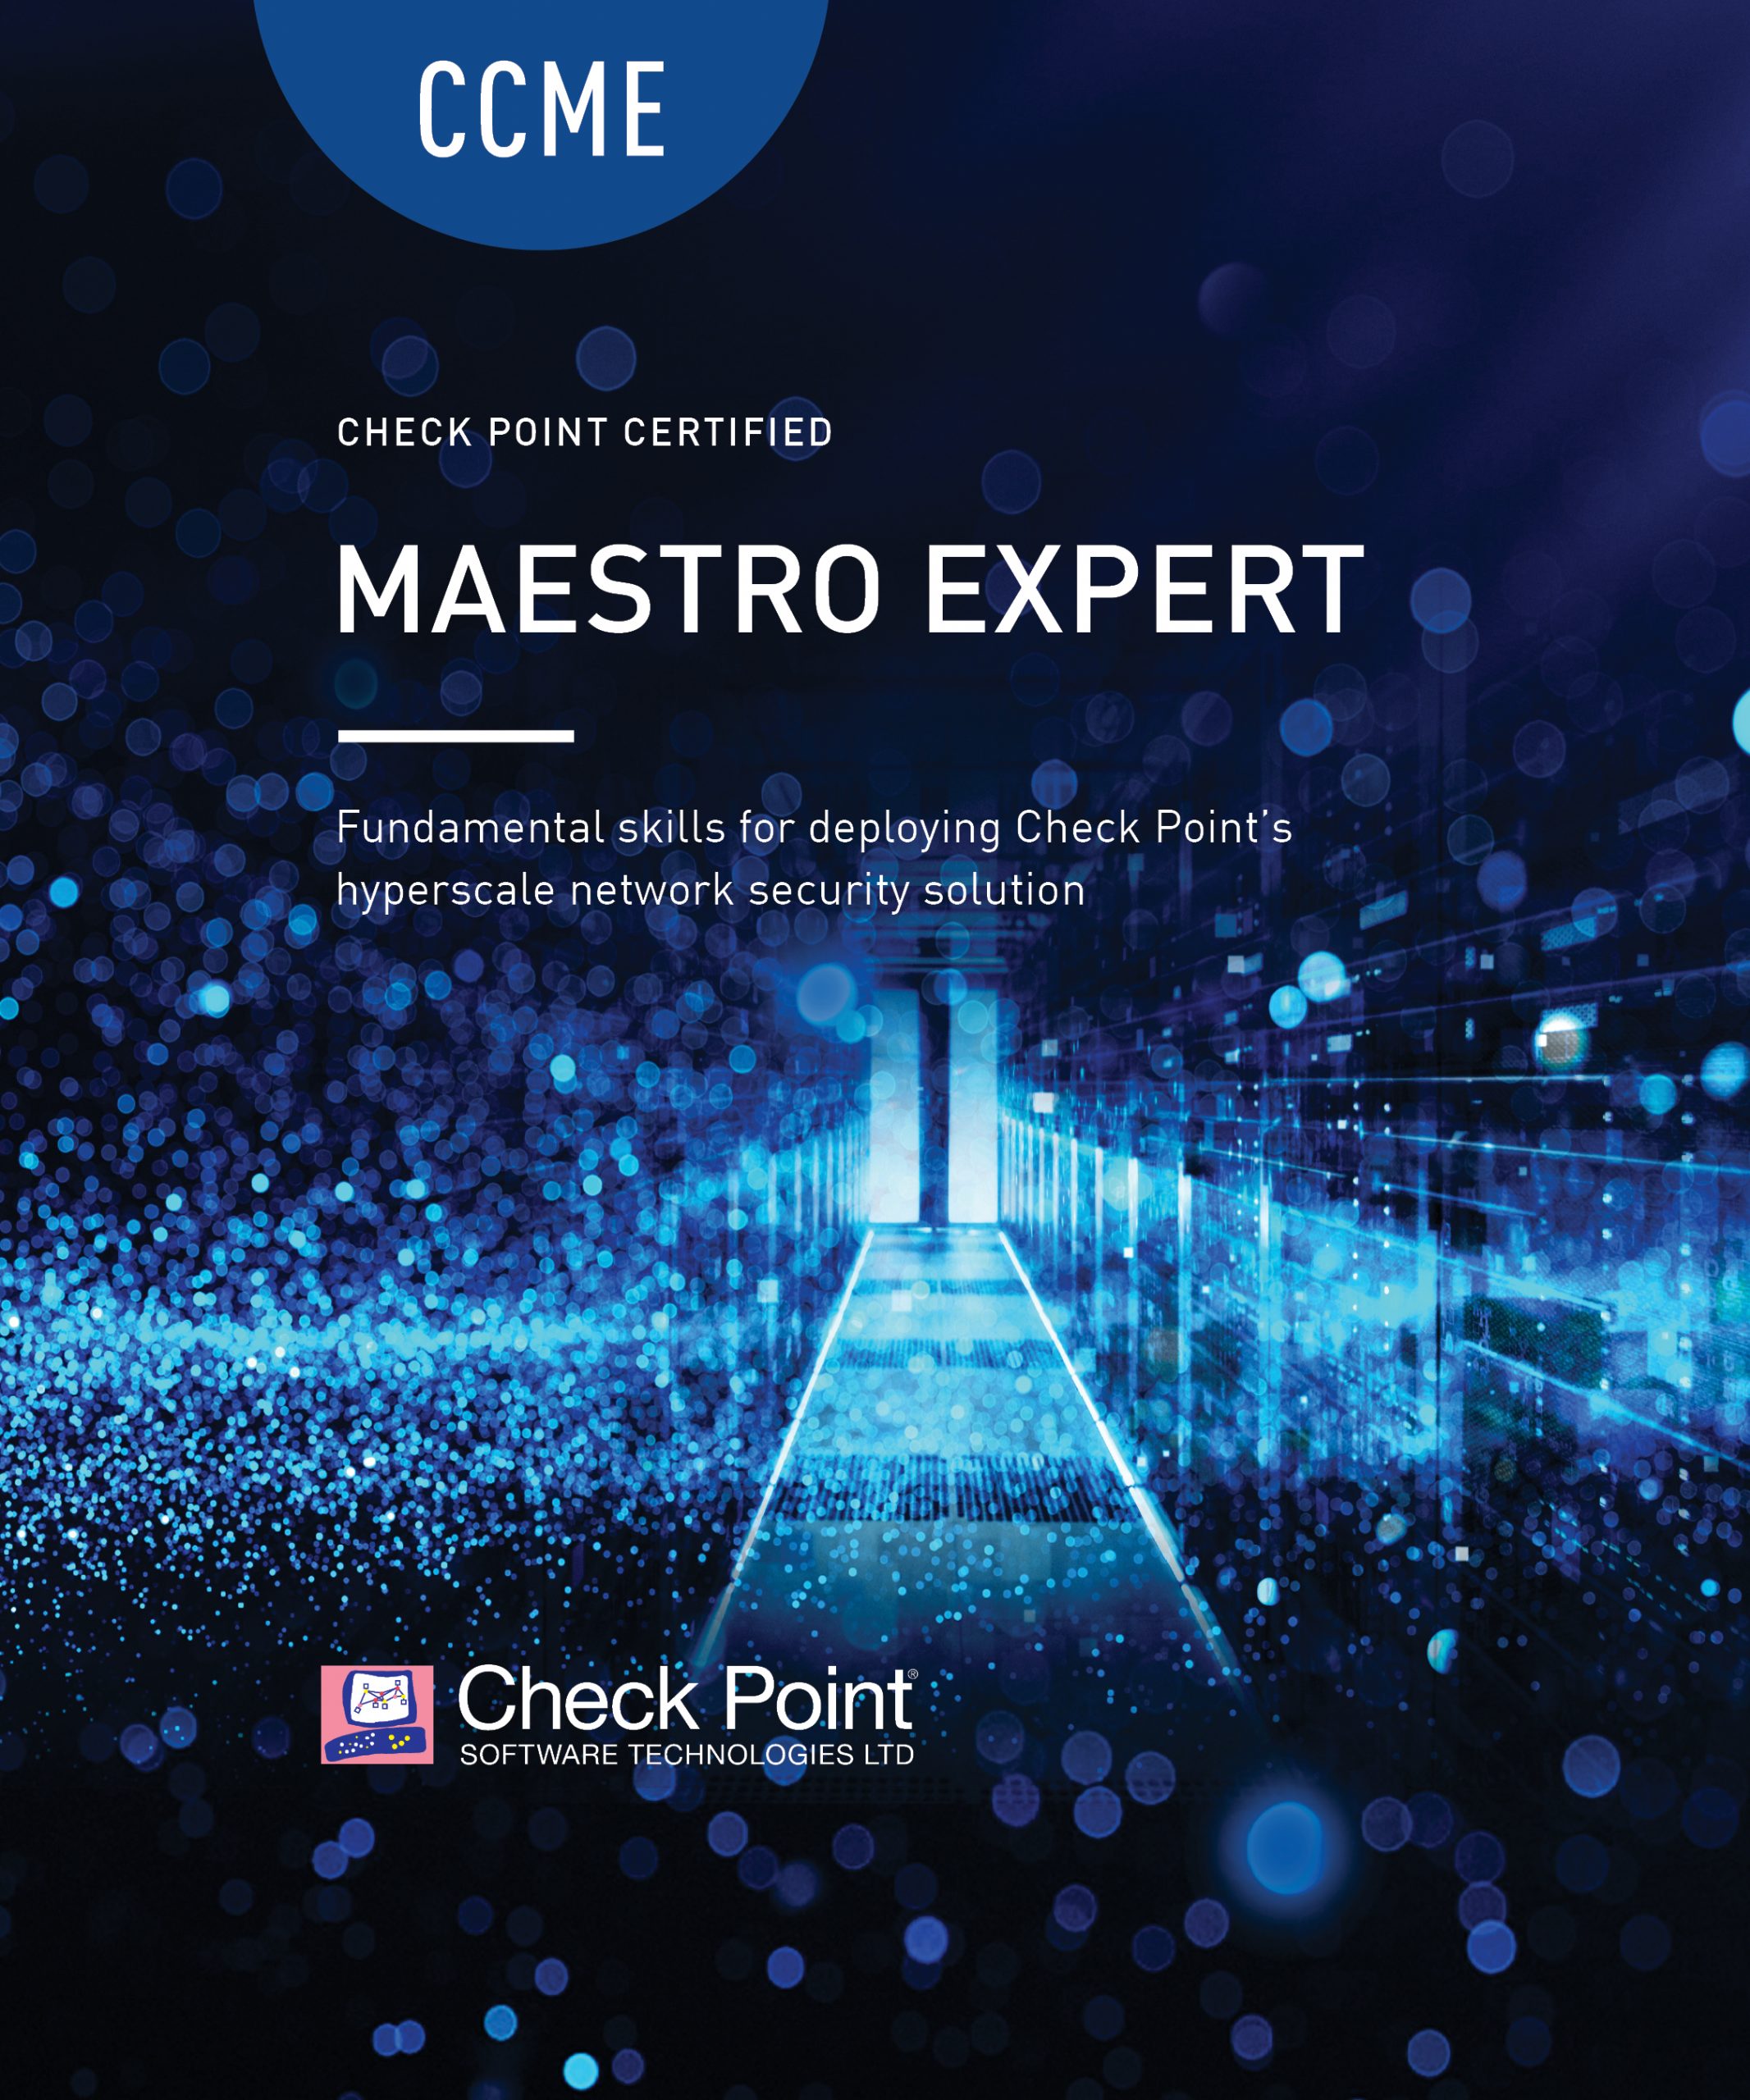 CCME – Check Point Certified Maestro Expert (CCME)